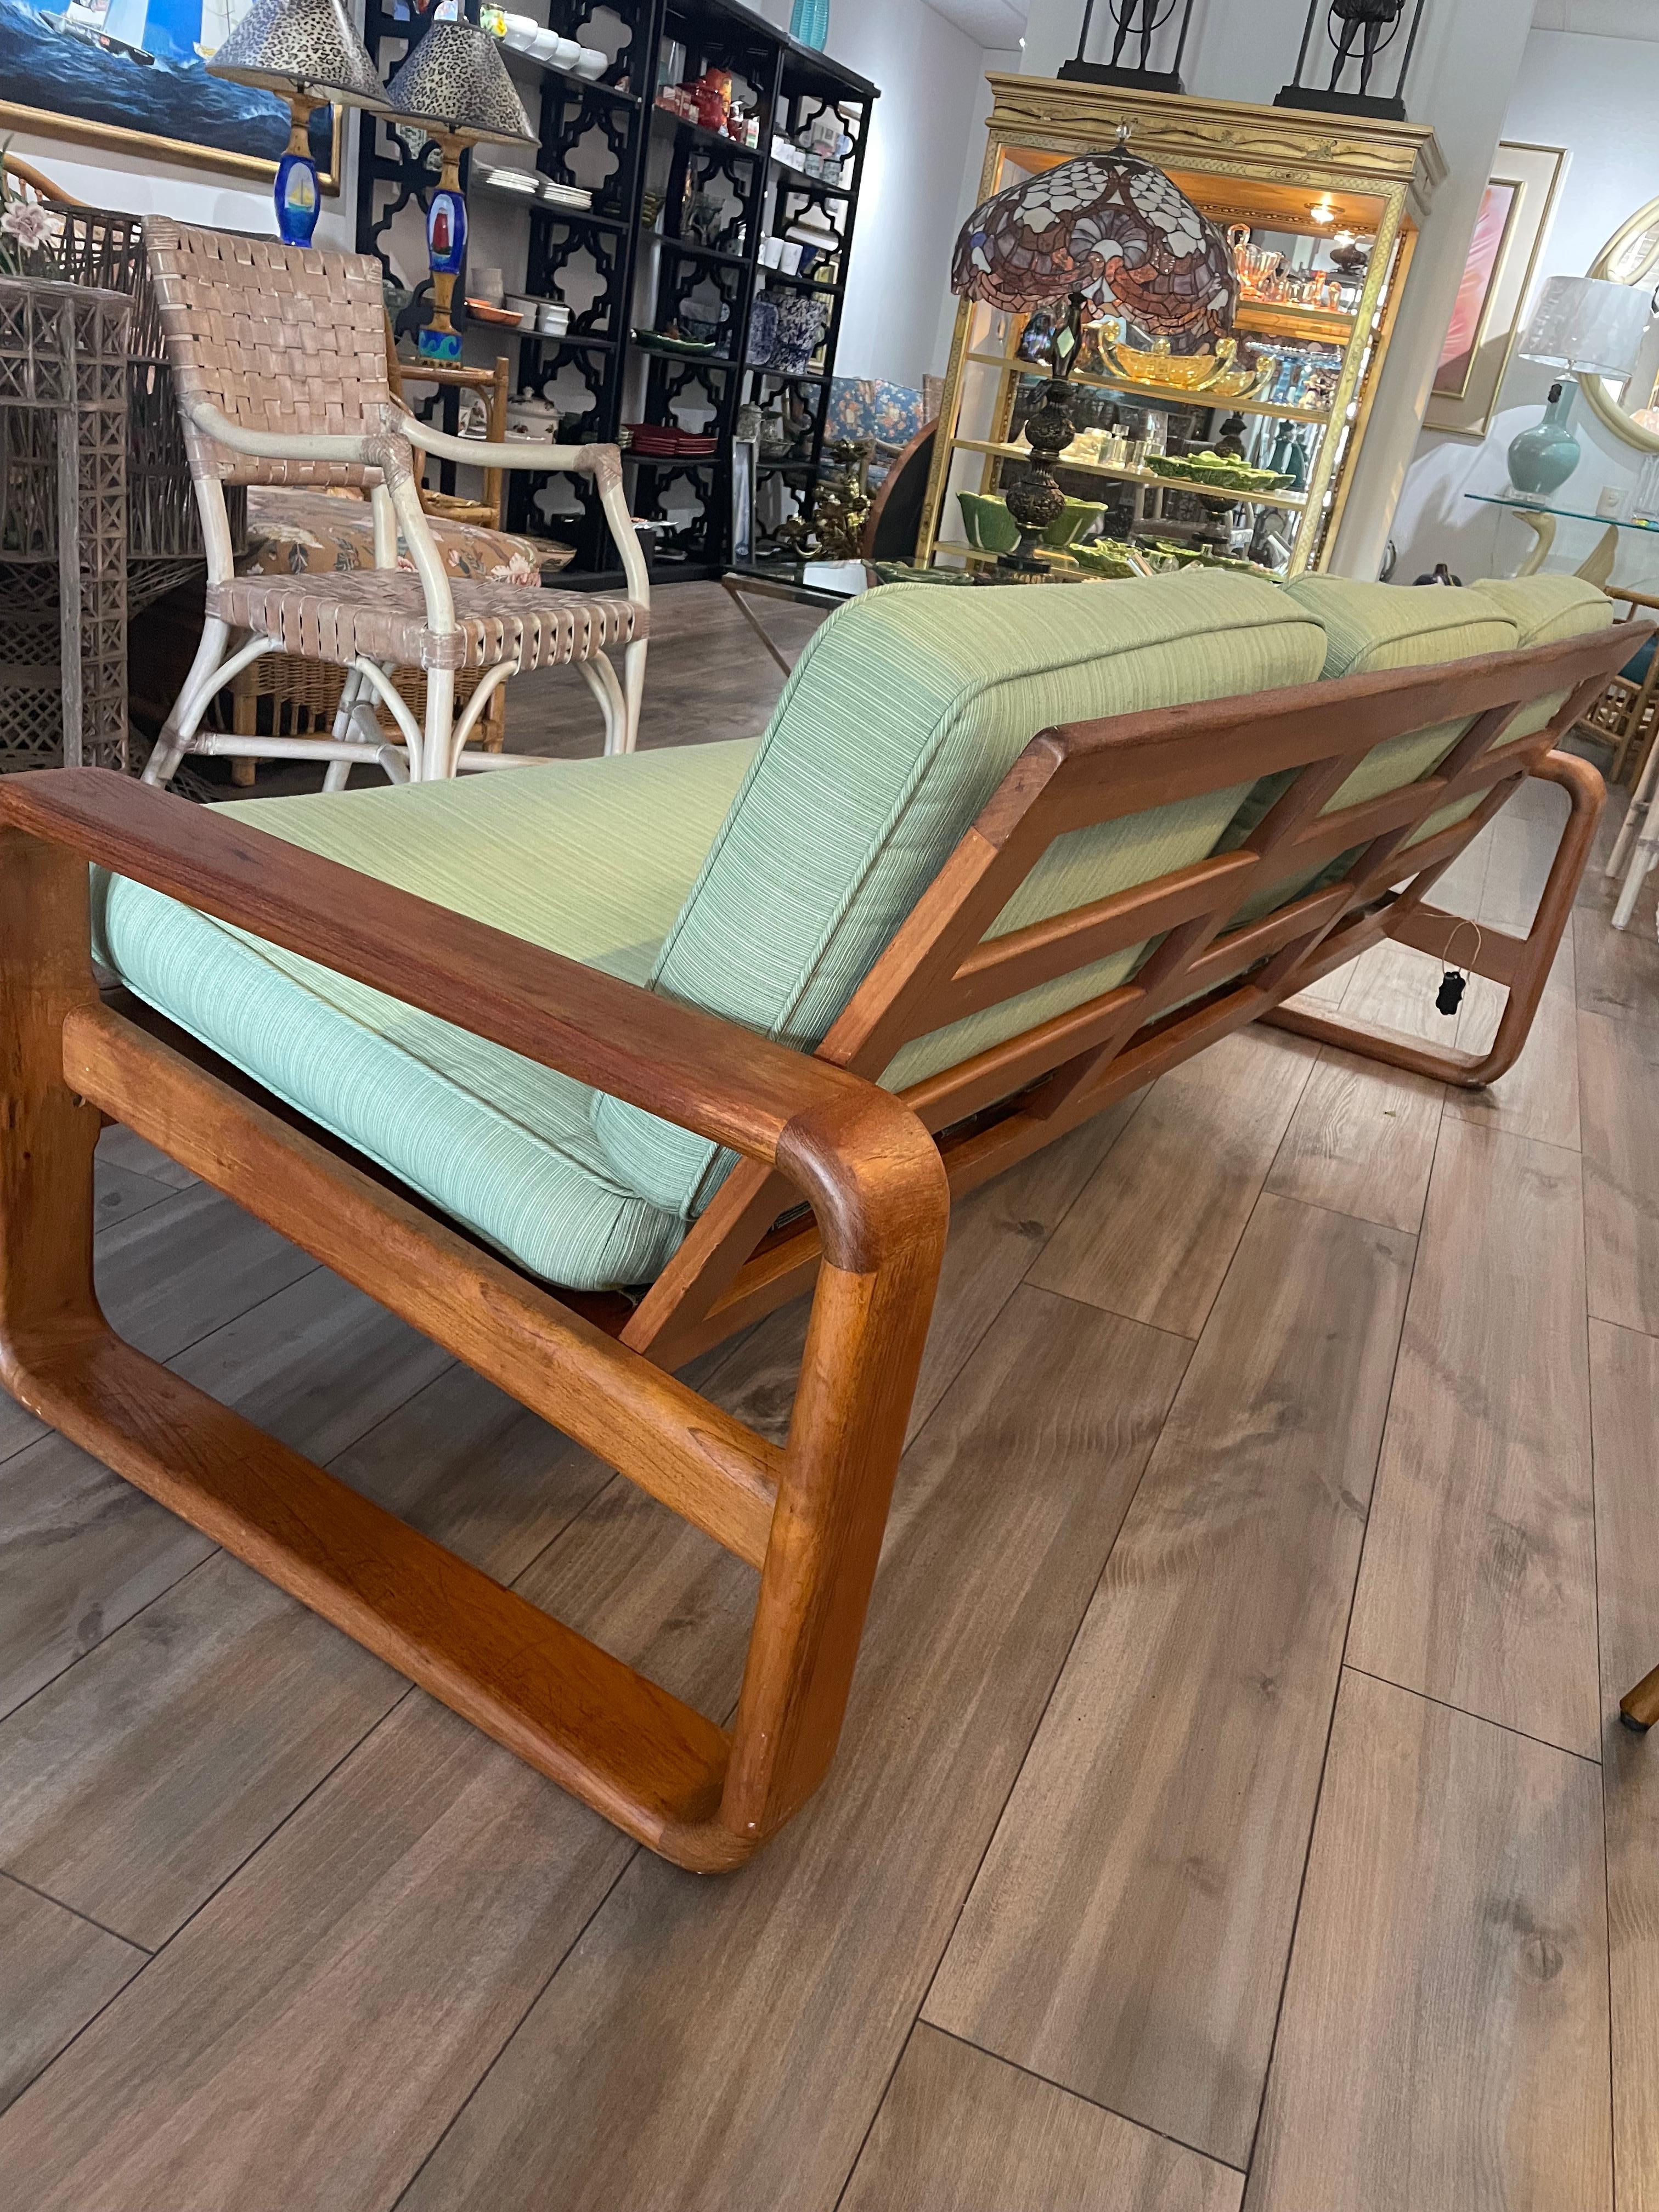 I believe this is 70;s Danish but has no markings, The teak is beautiful and in good condition. The lines on the profile are sleek and memorable. The cushion do not look original but in good condition, I could be wrong, the back of cushions are worn